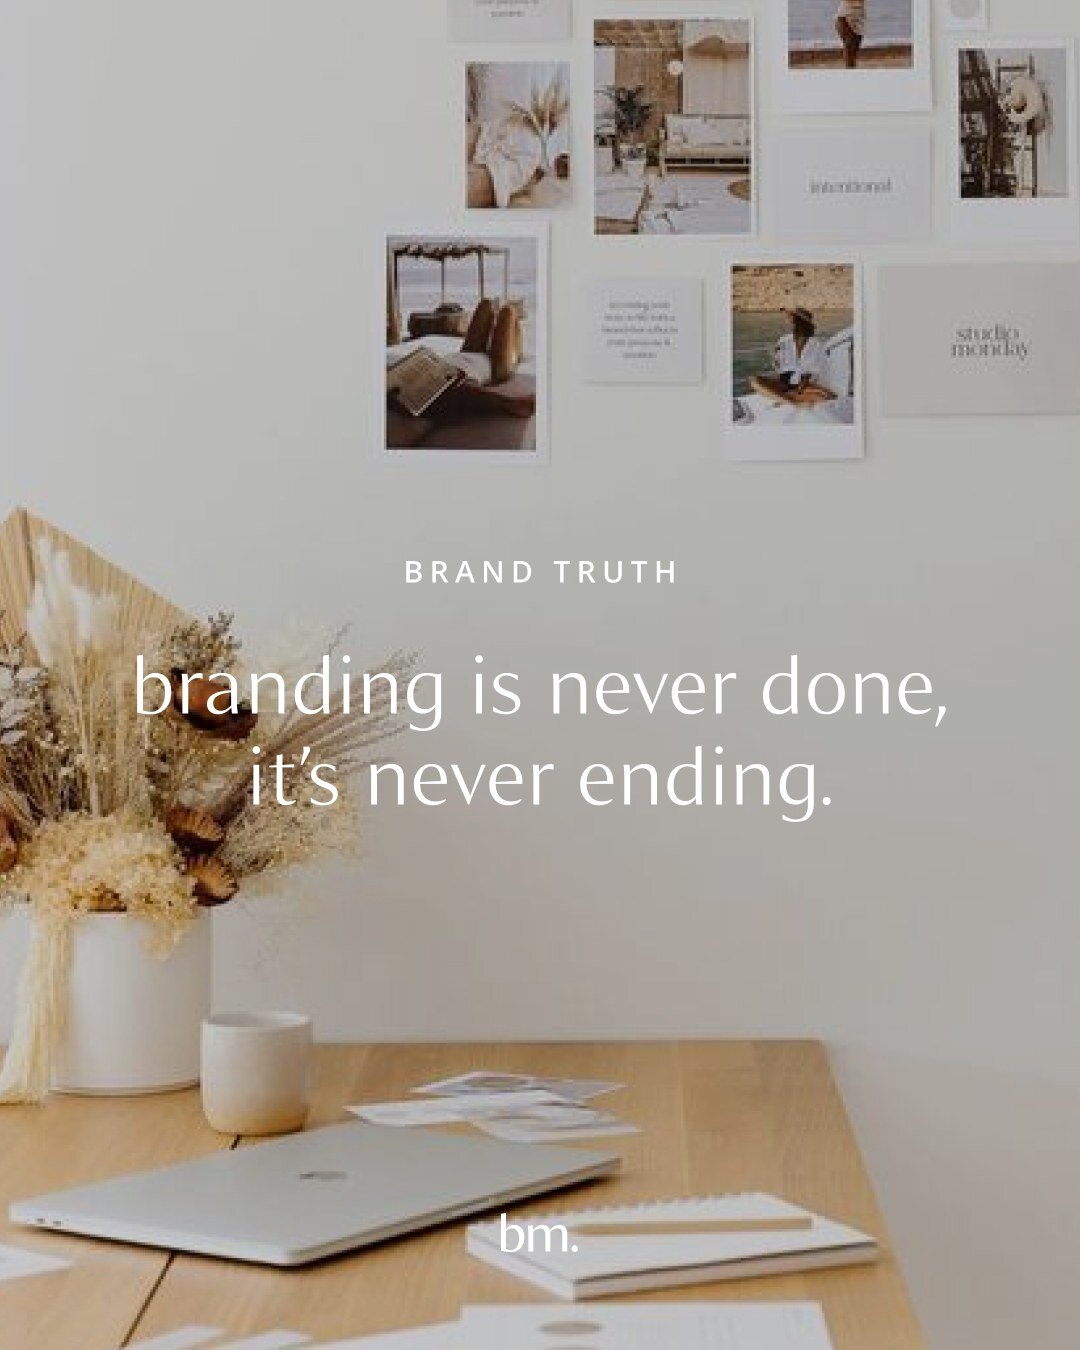 Branding isn't a one-and-done deal. It's a living entity, needing constant TLC to stay impactful, connect with our audience, and keep pace with the ever-evolving business landscape.

Once you have your brand strategy and your visual identity complete